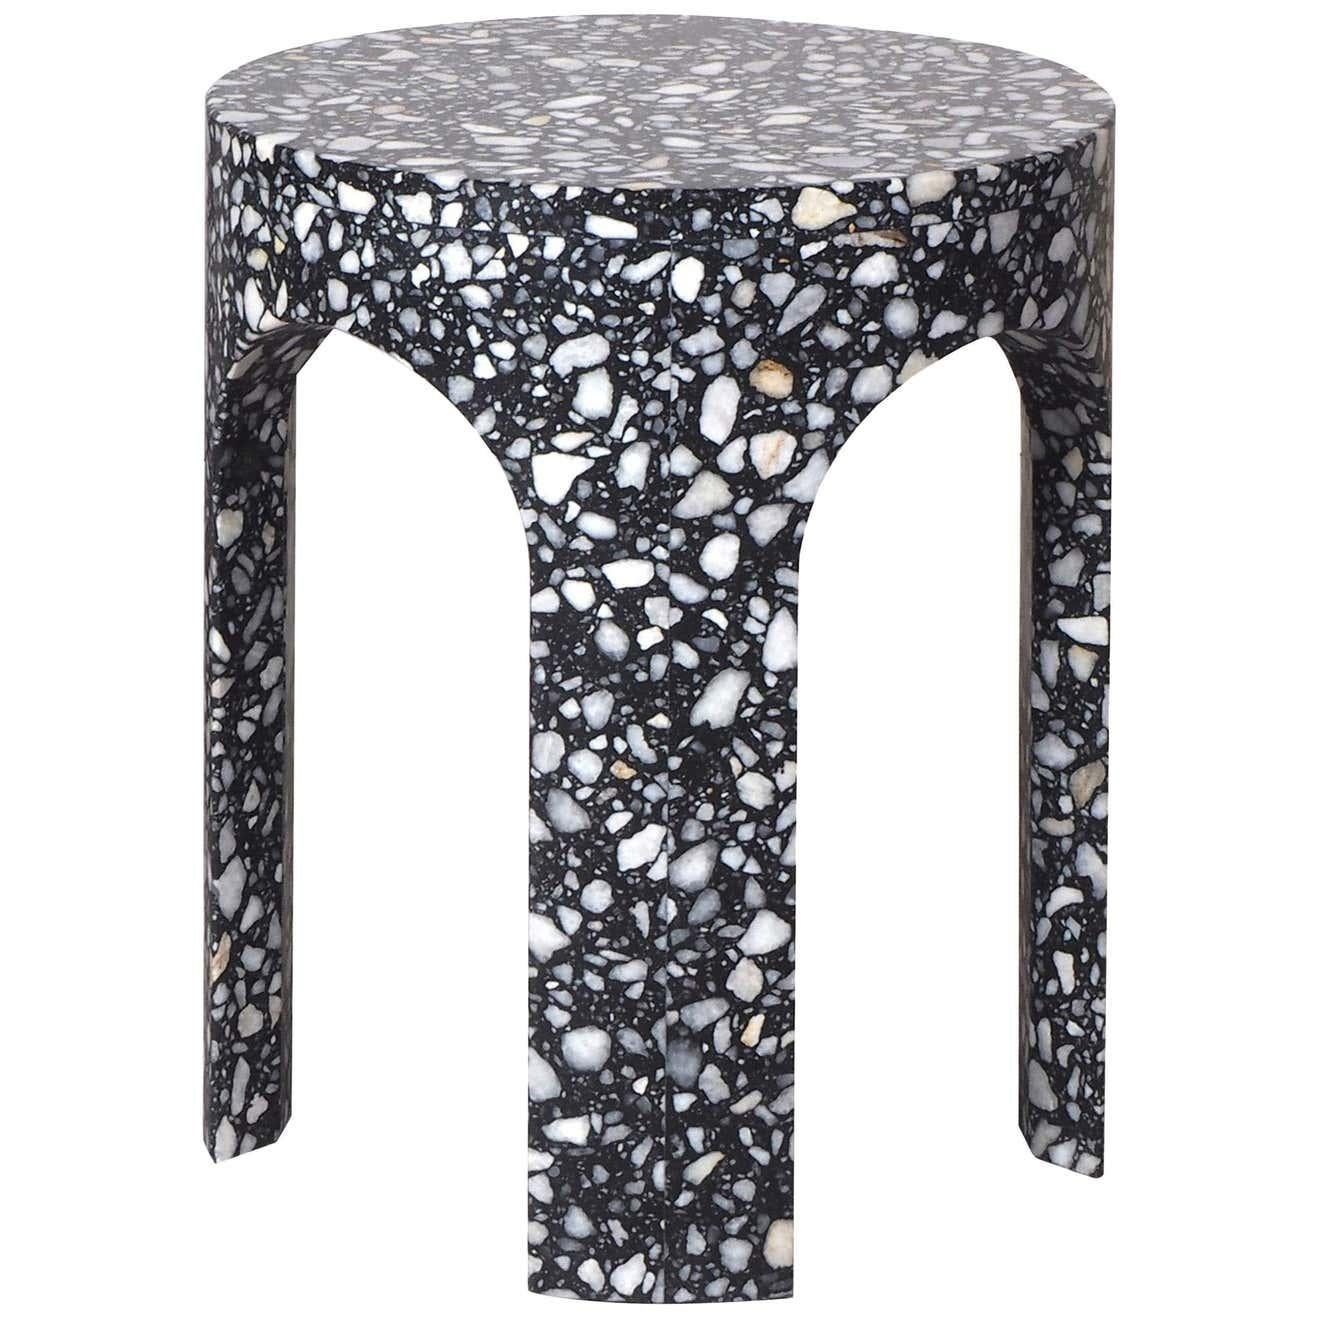 Black Loggia Terrazzo Side Table by Matteo Leorato
Dimensions: Diameter 38 x H 45 cm 
Materials: Terrazzo (Marble and Resin). 
Also available in White. Please contact us for more information. 


An essential element with a strong stylistic impact